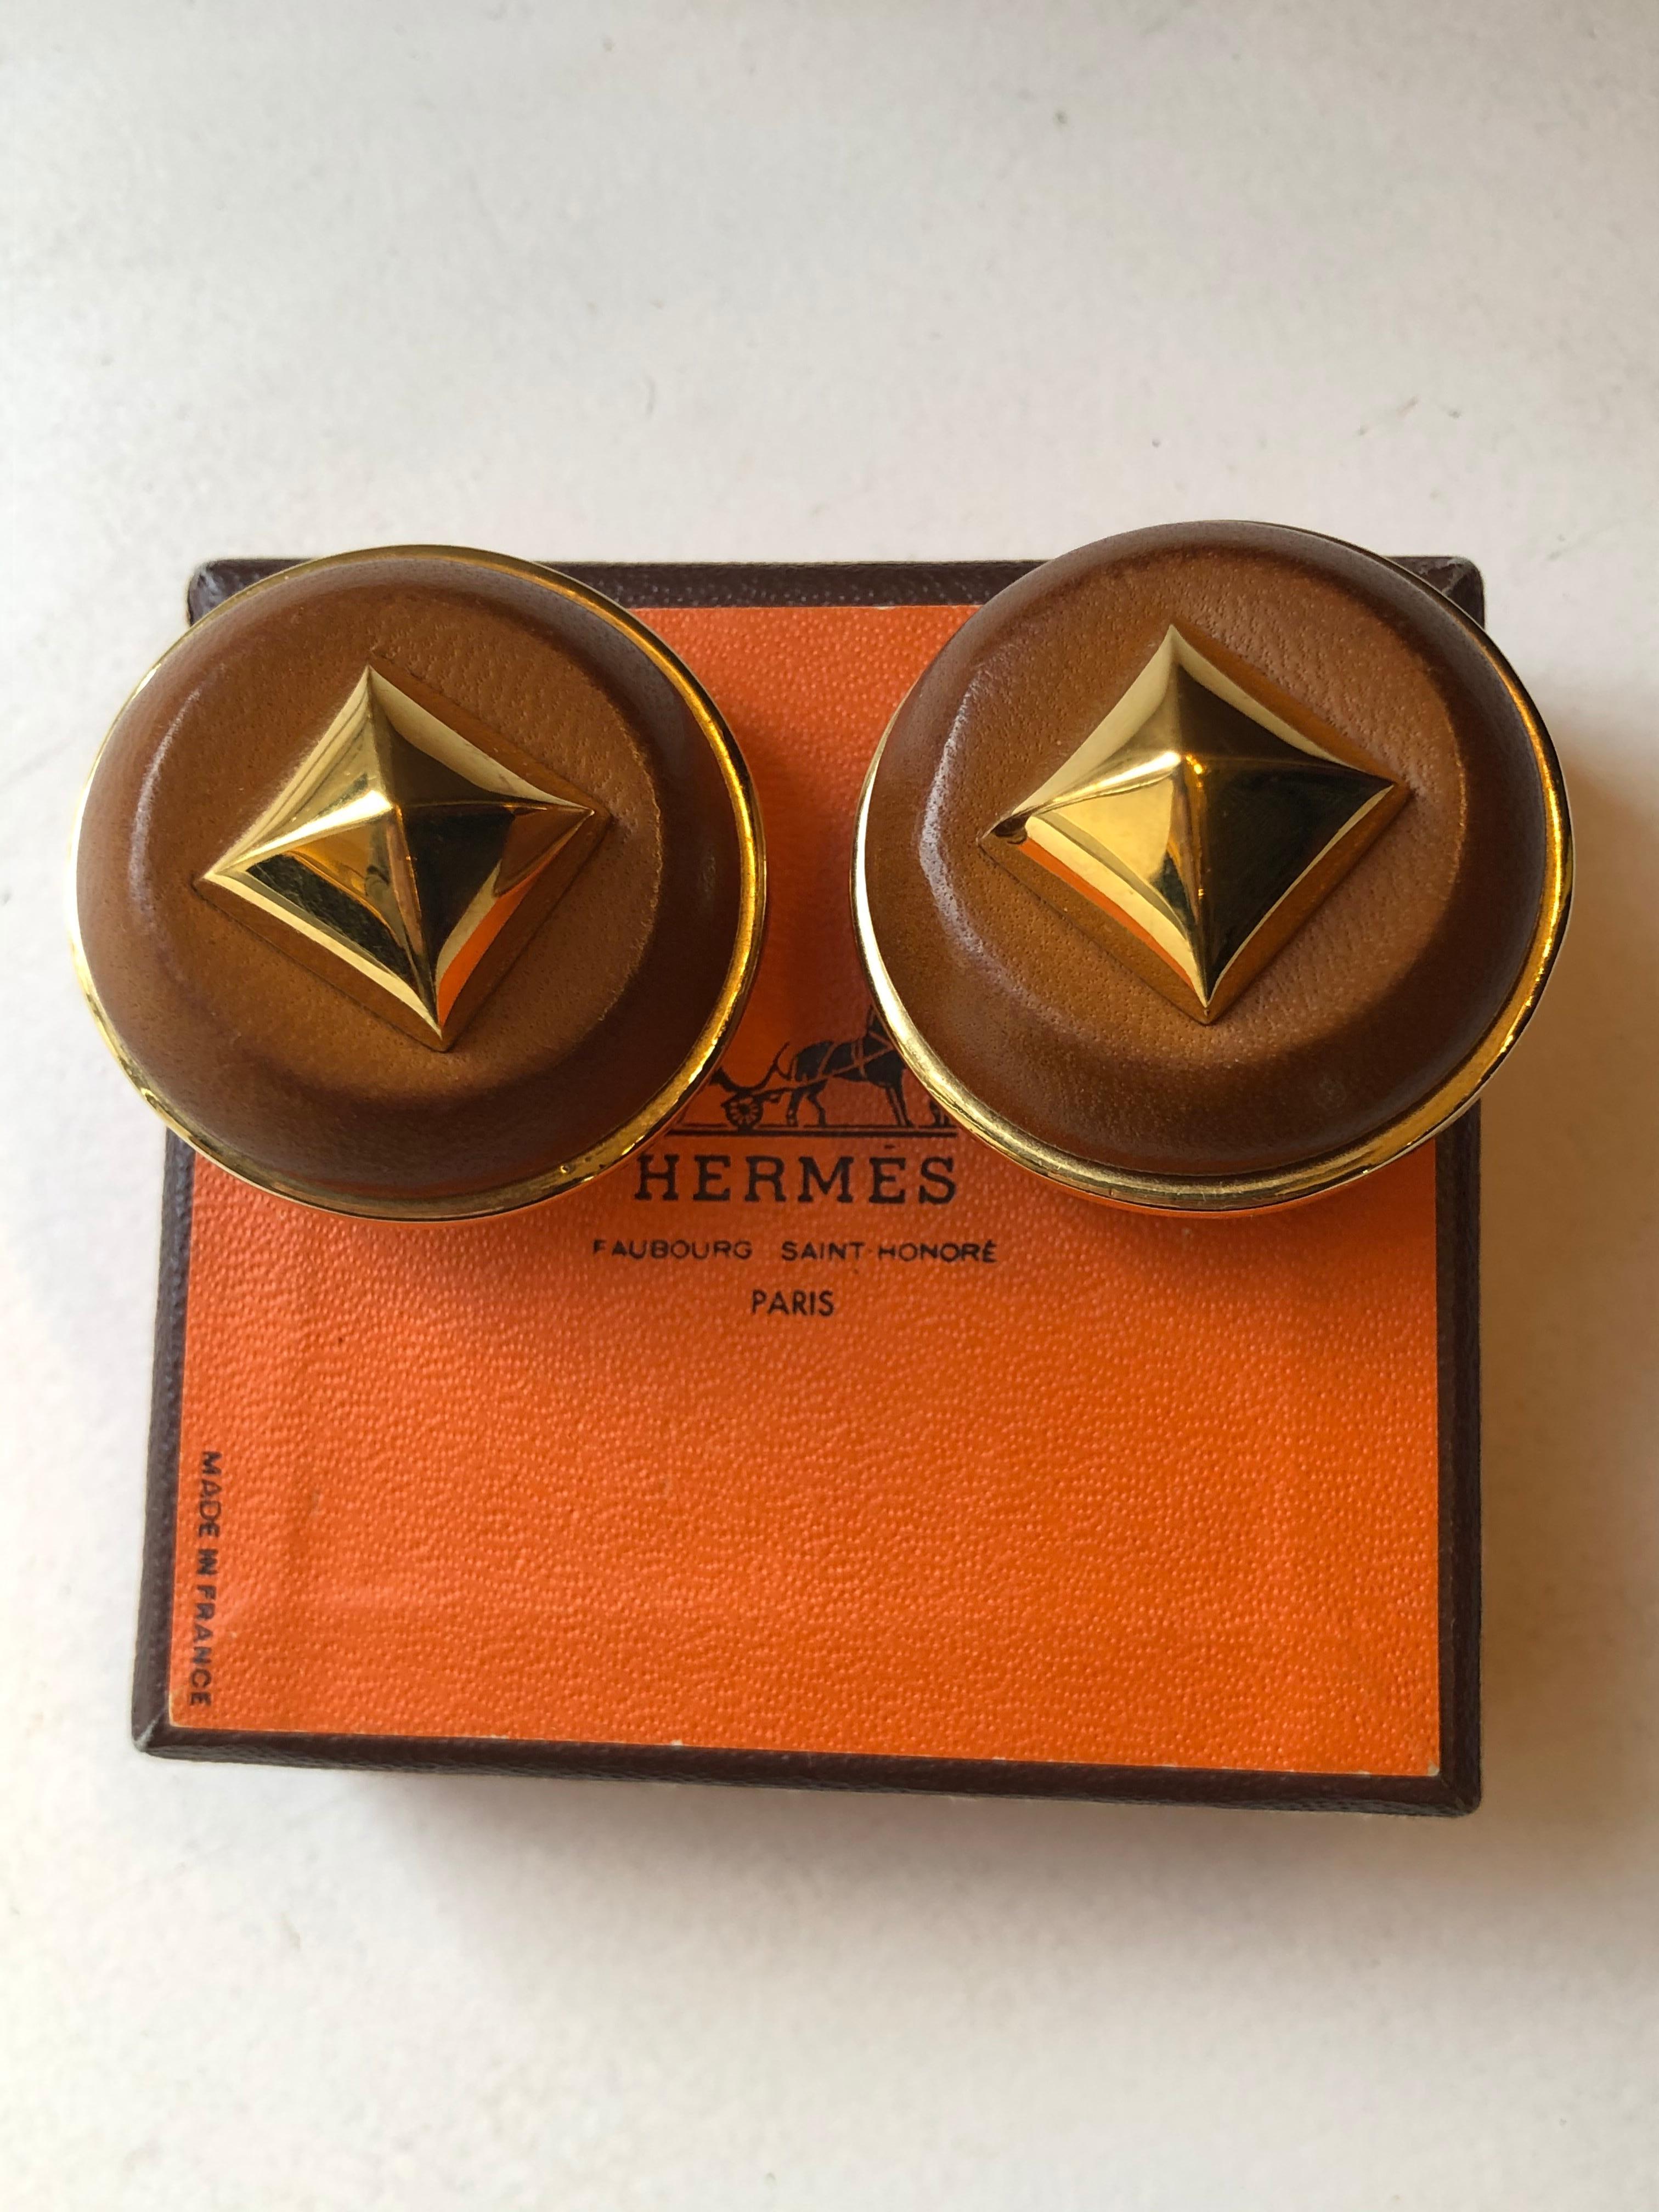 These are vintage Hermes clip earring in lambskin leather signed Hermes Paris. 